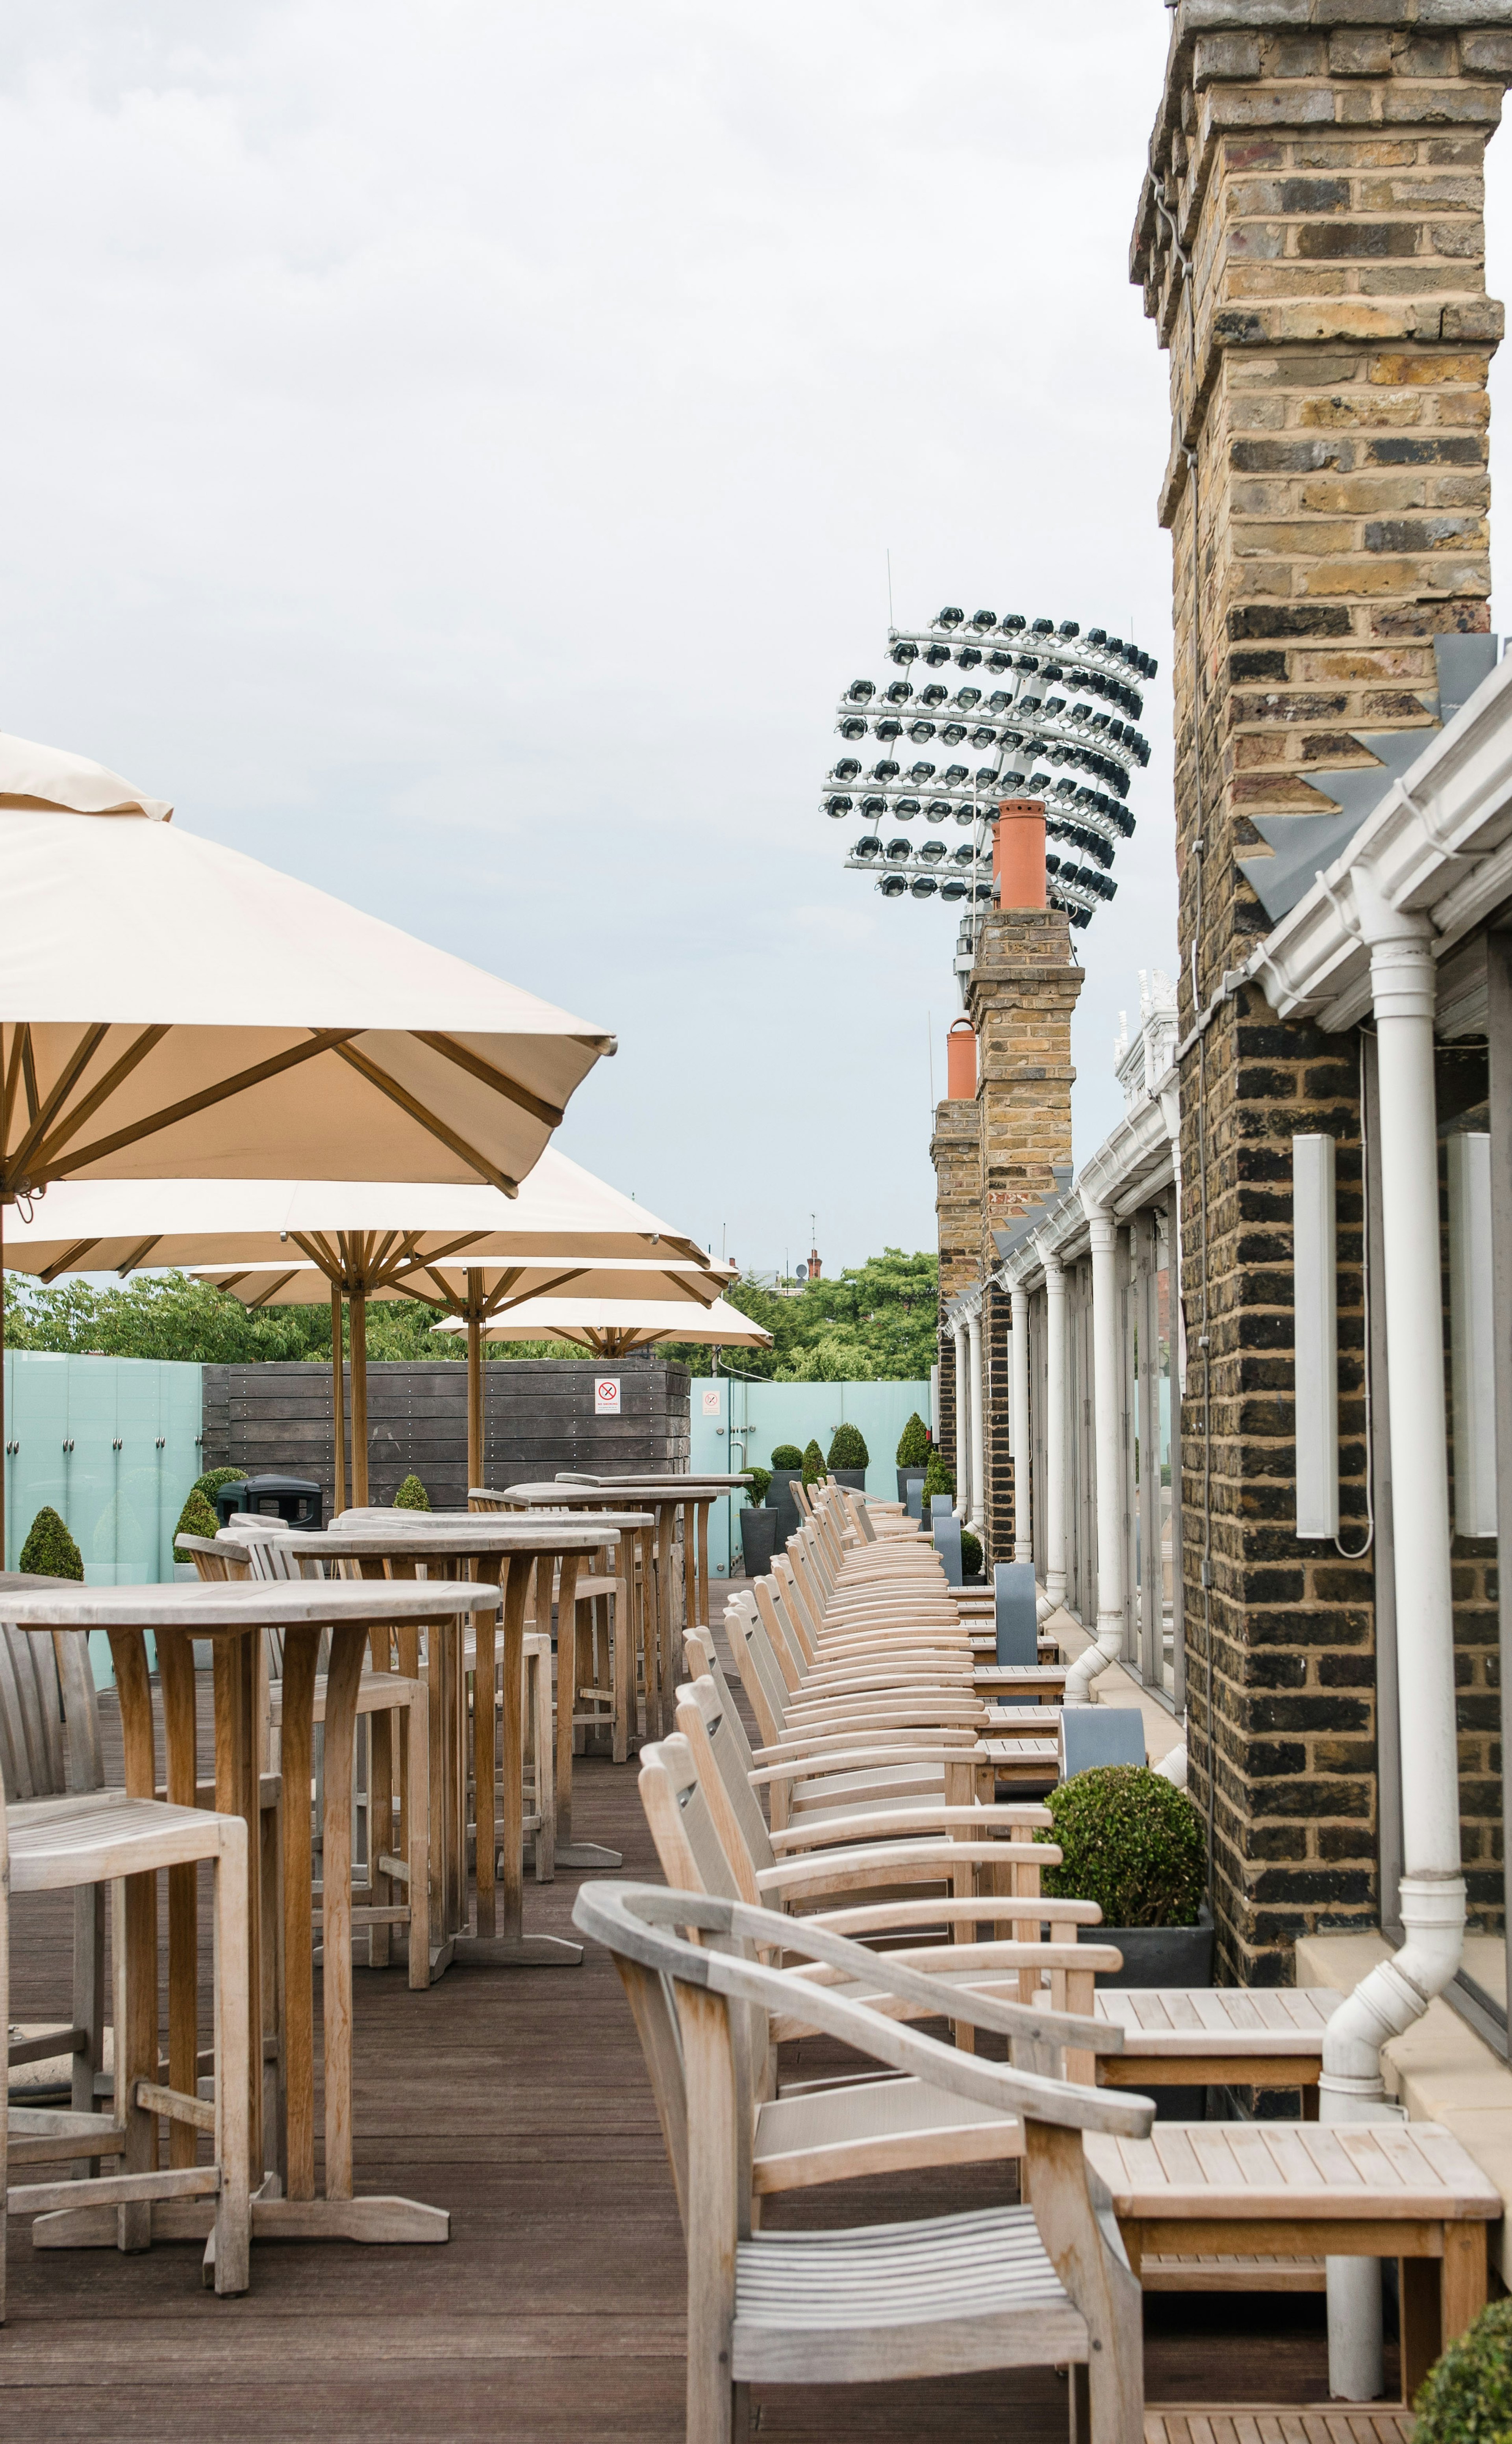 Summer Party Venues - Lord's Cricket Ground